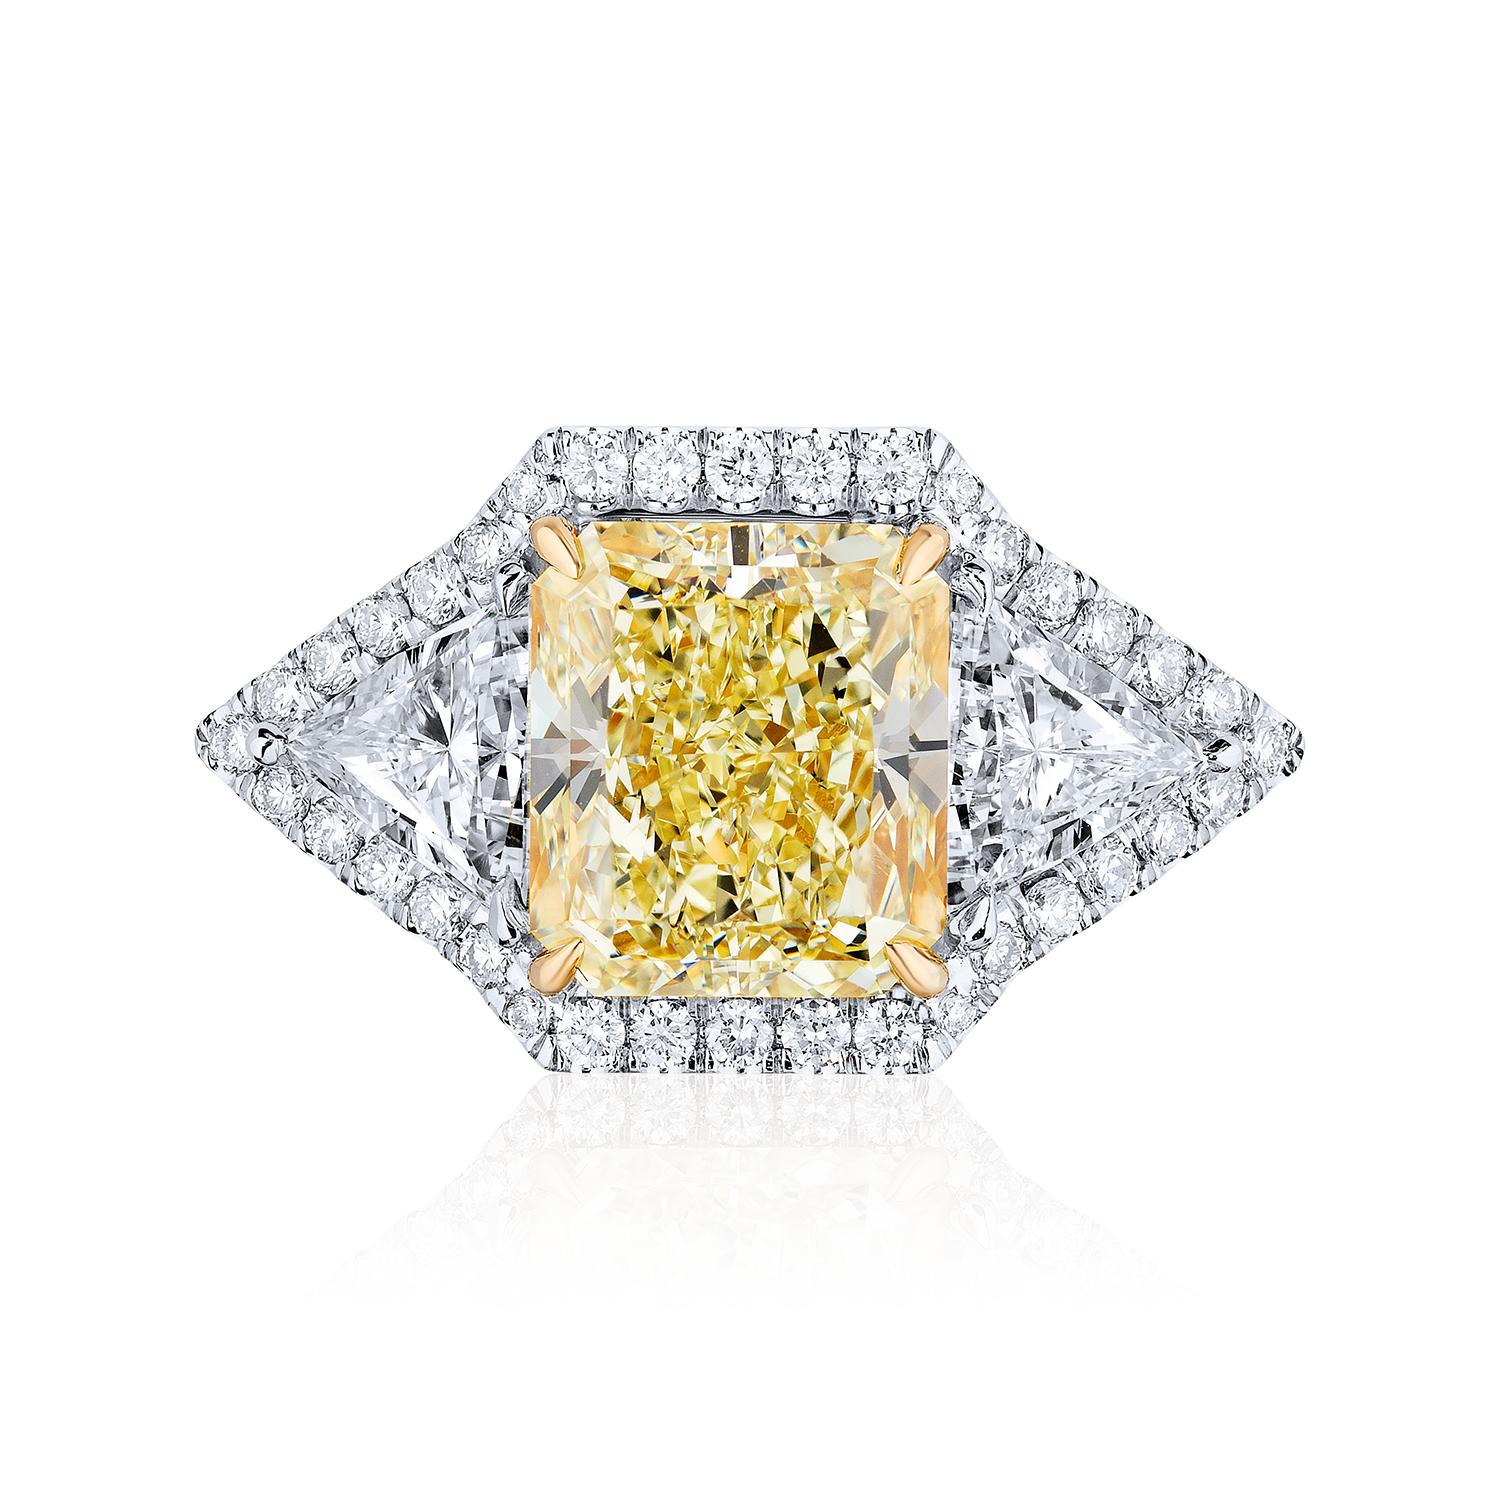 Centered upon a 5.02 Carat Radiant Cut Cut flanked by Triangle Shaped Diamonds and surrounded by Round Brilliant in a micro pave design.
6.96 Carats in Total.

Center stone weighing 5.02 Carats certified by GIA as Y-Z color and SI1